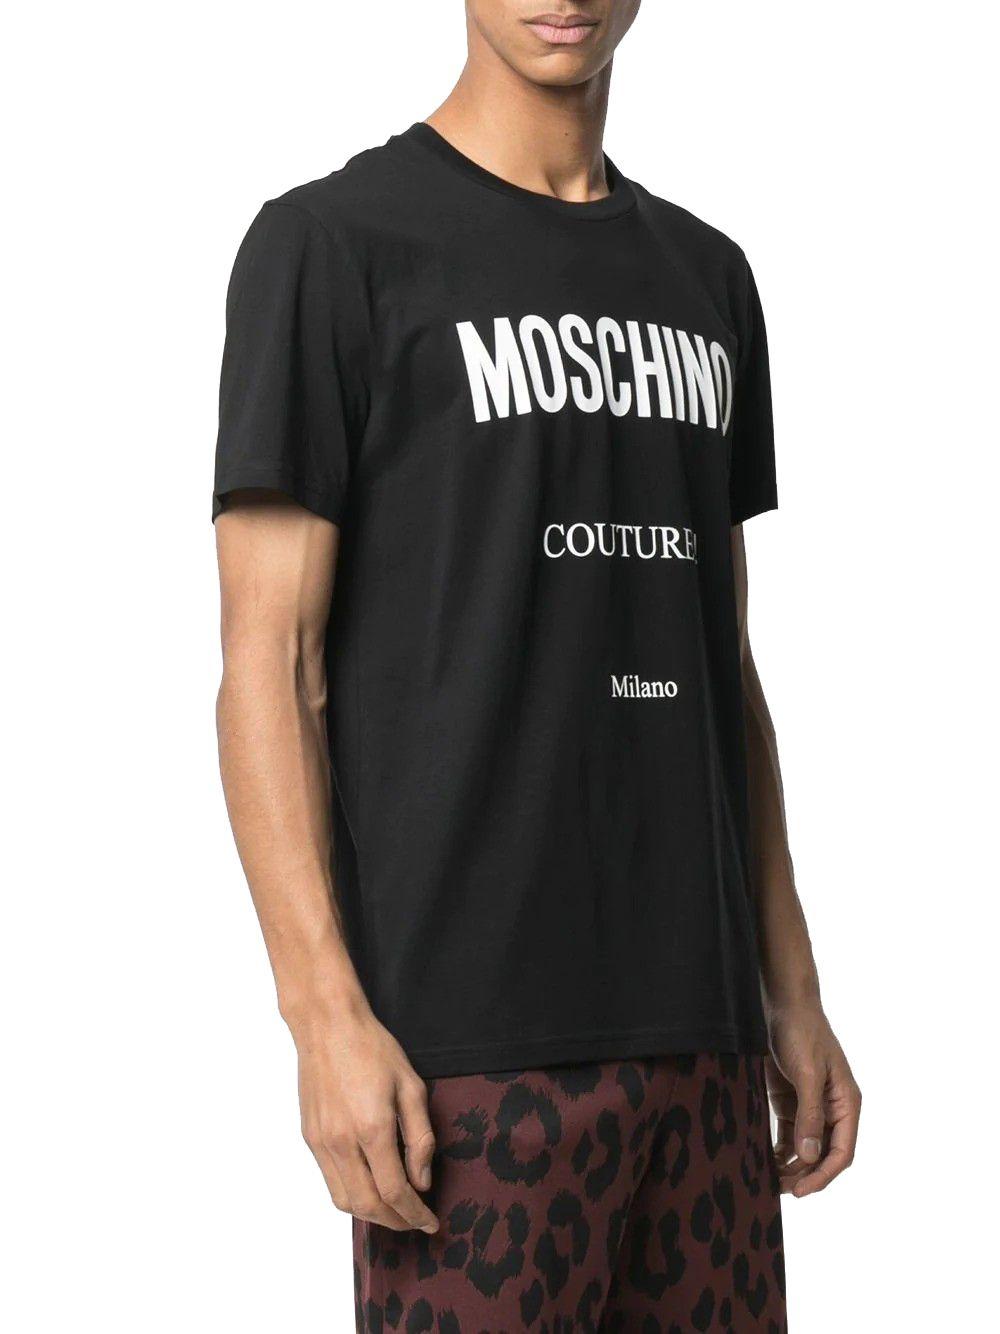 Moschino Cotton T-shirt in Black for Men - Lyst